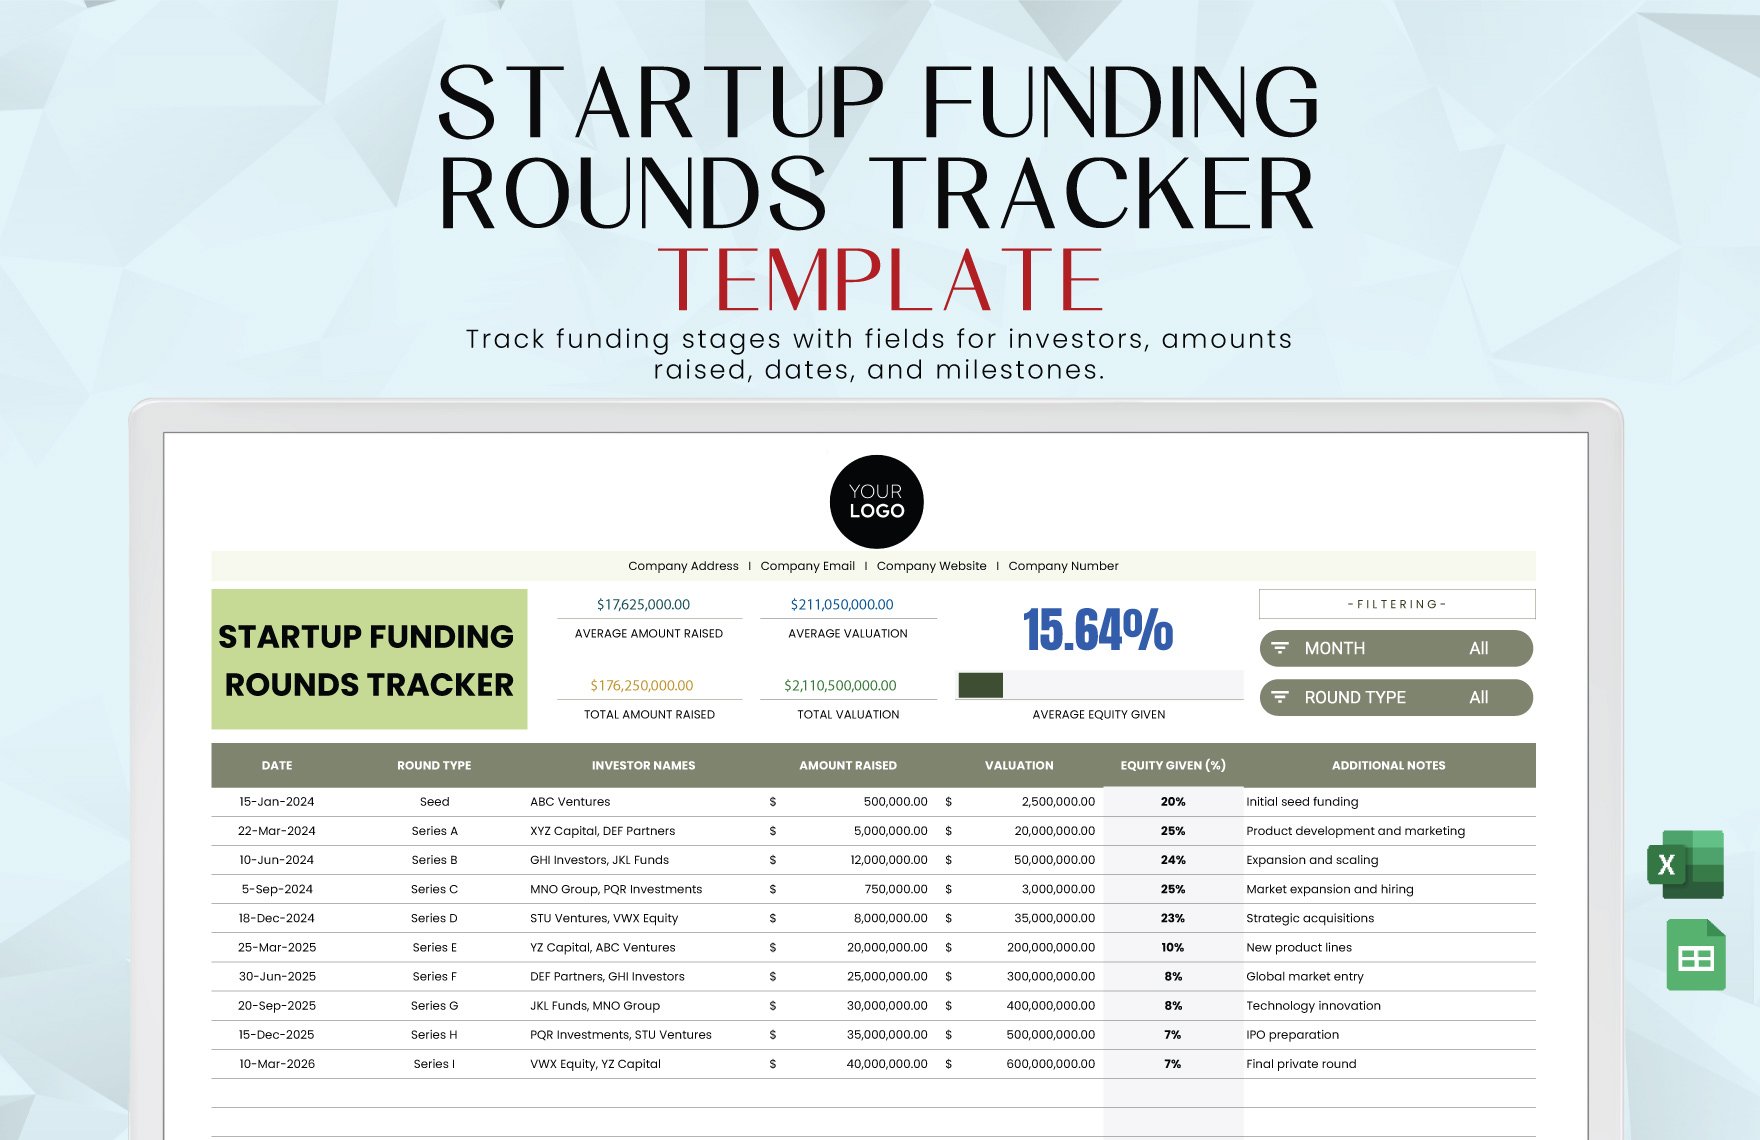 Startup Funding Rounds Tracker Template in Excel, Google Sheets